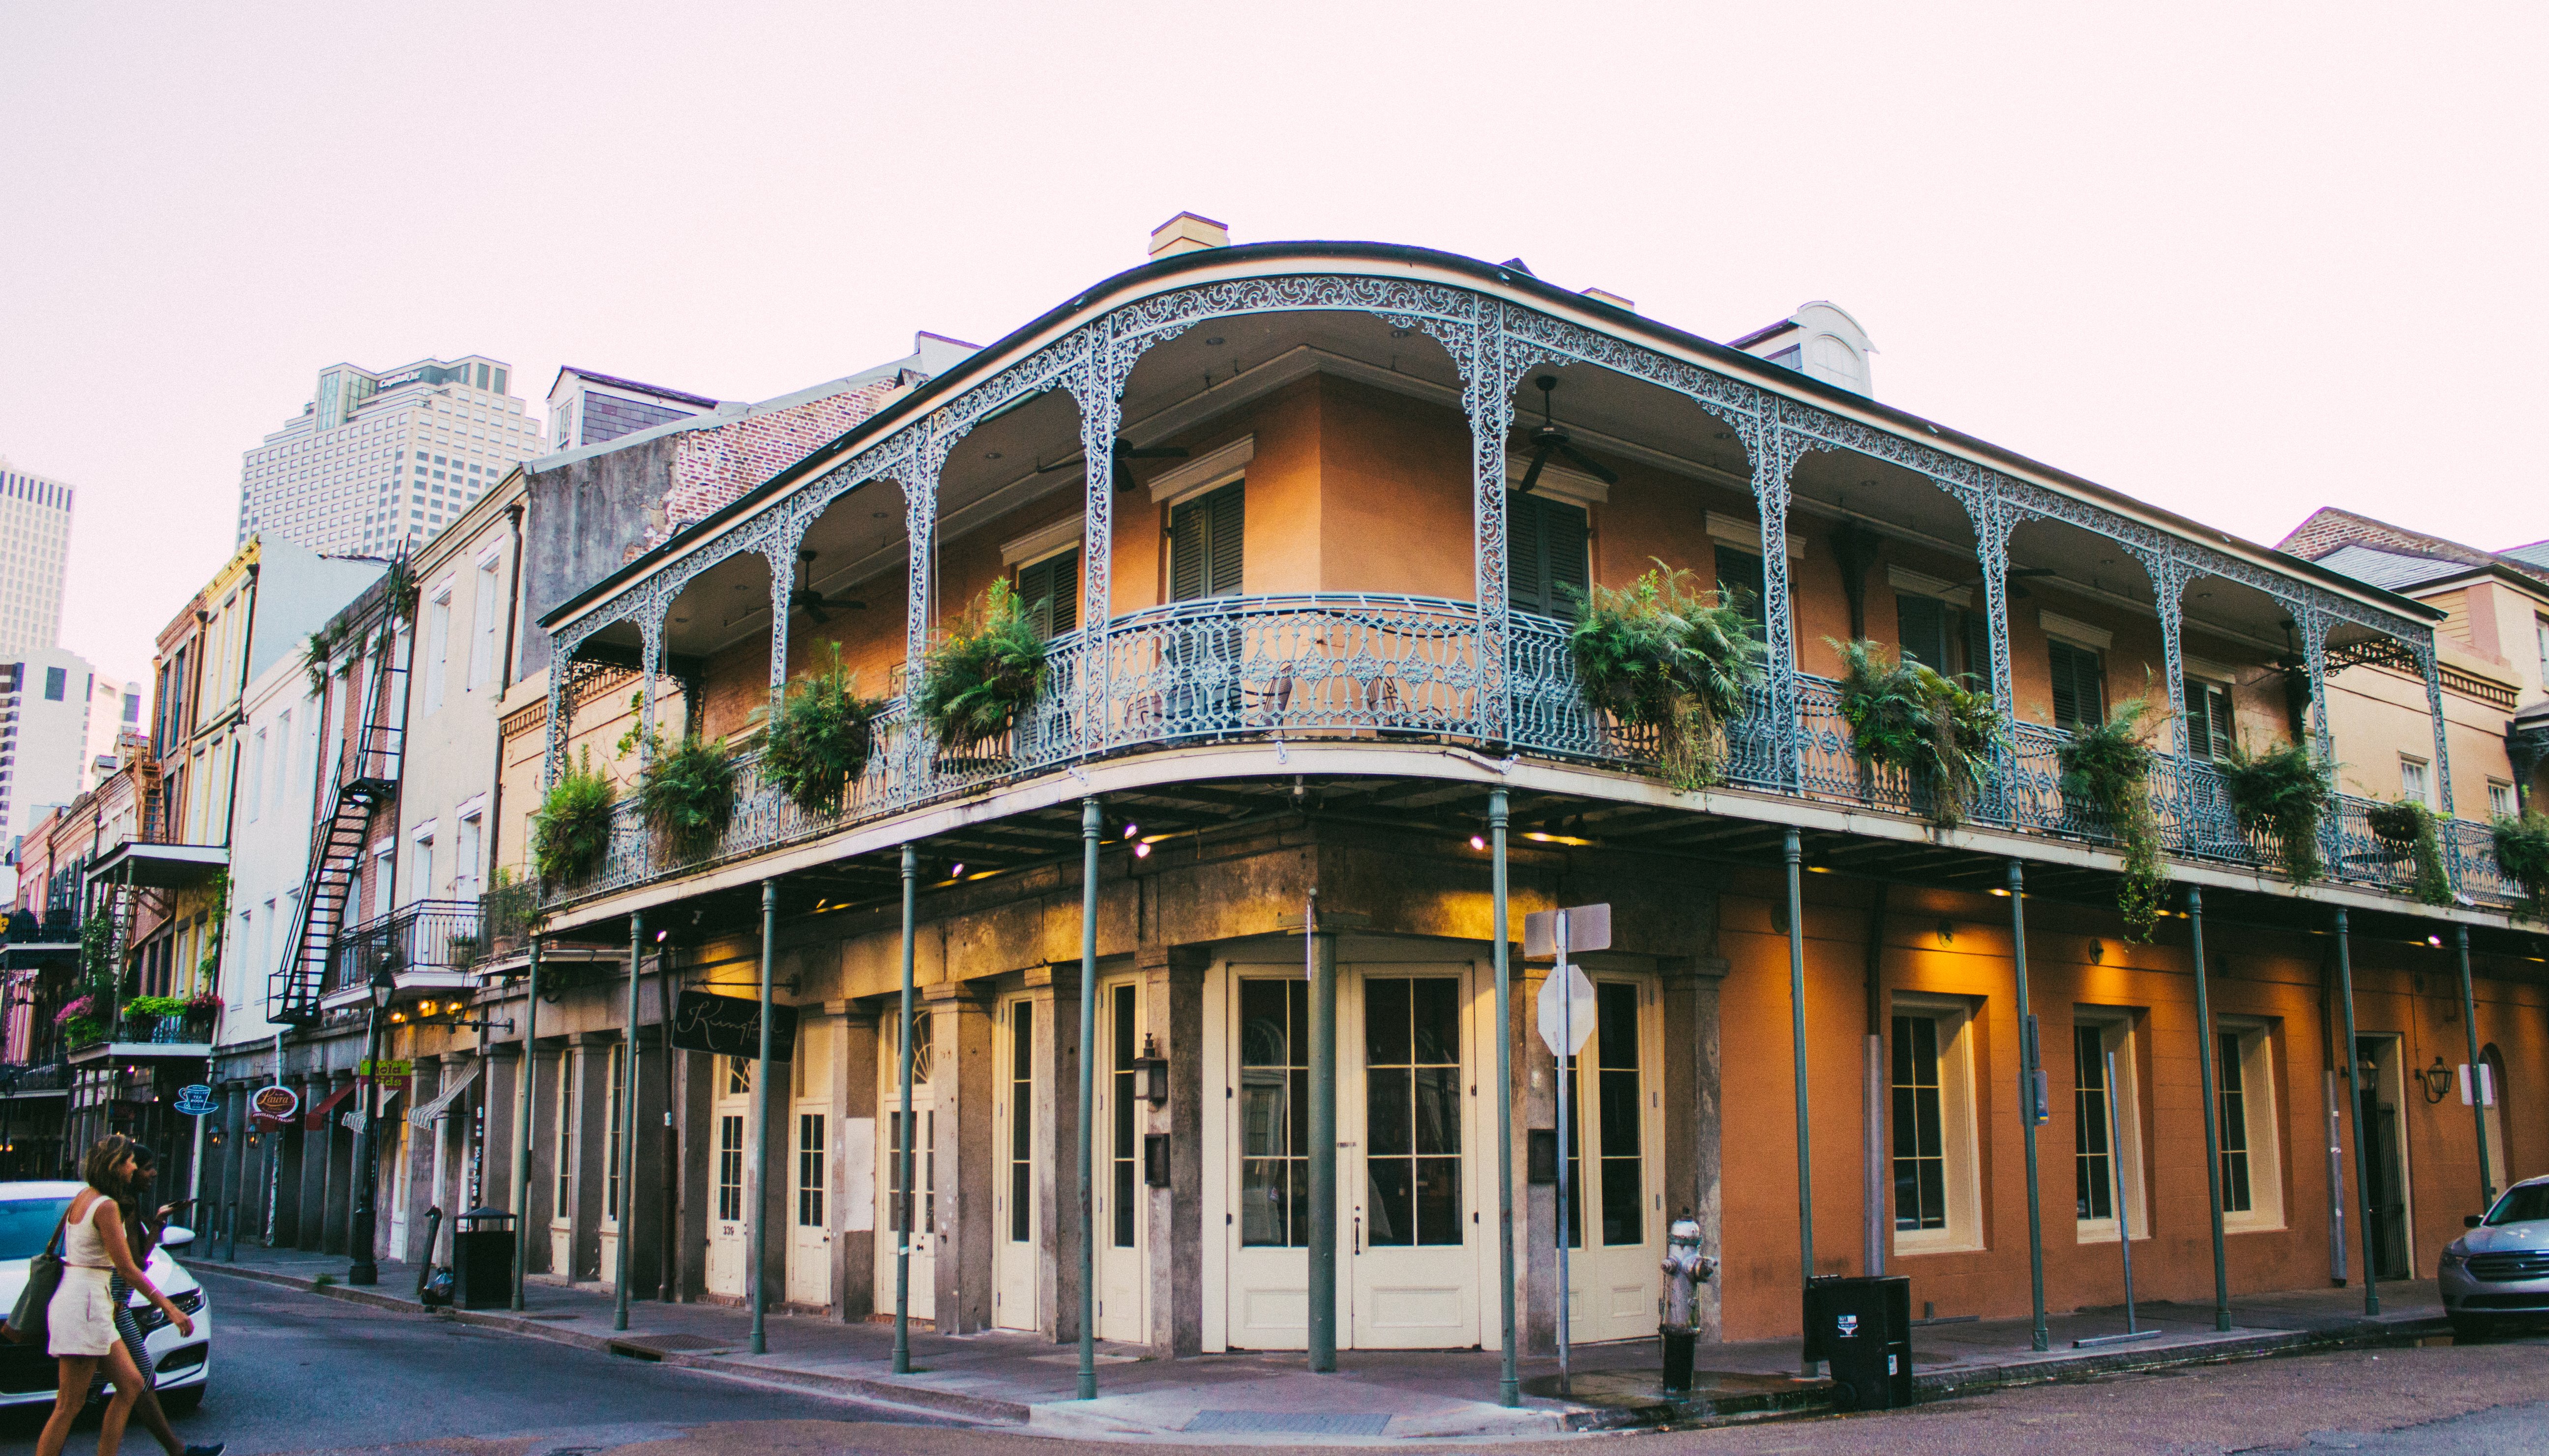 Read New Orleans by Lucile Foraison